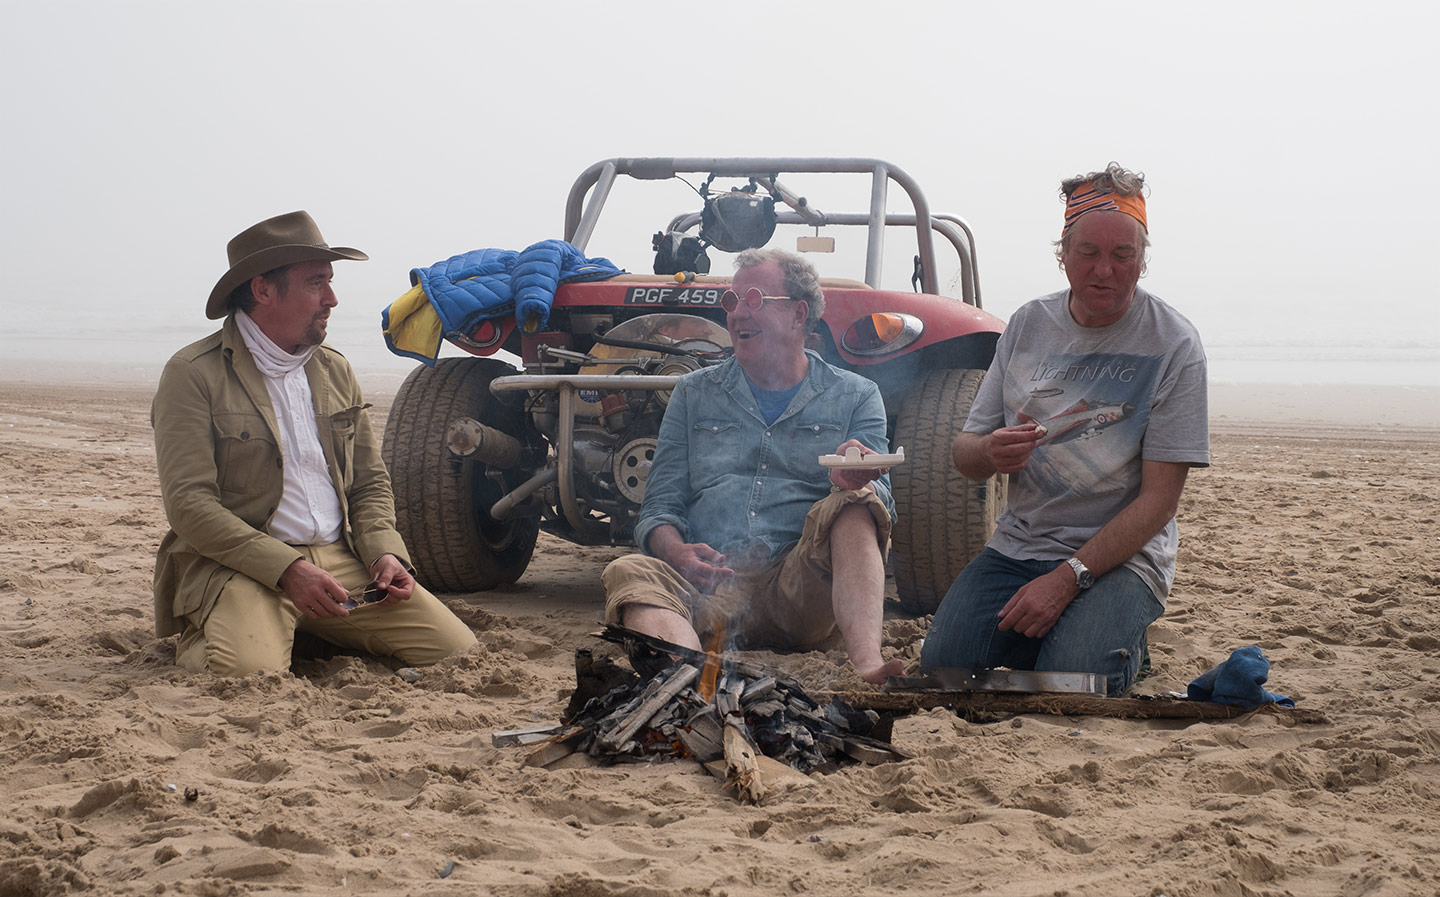 SANDWICHES IN THE SAND Hammond, Clarkson and May settle down for a snack in the Namib desert